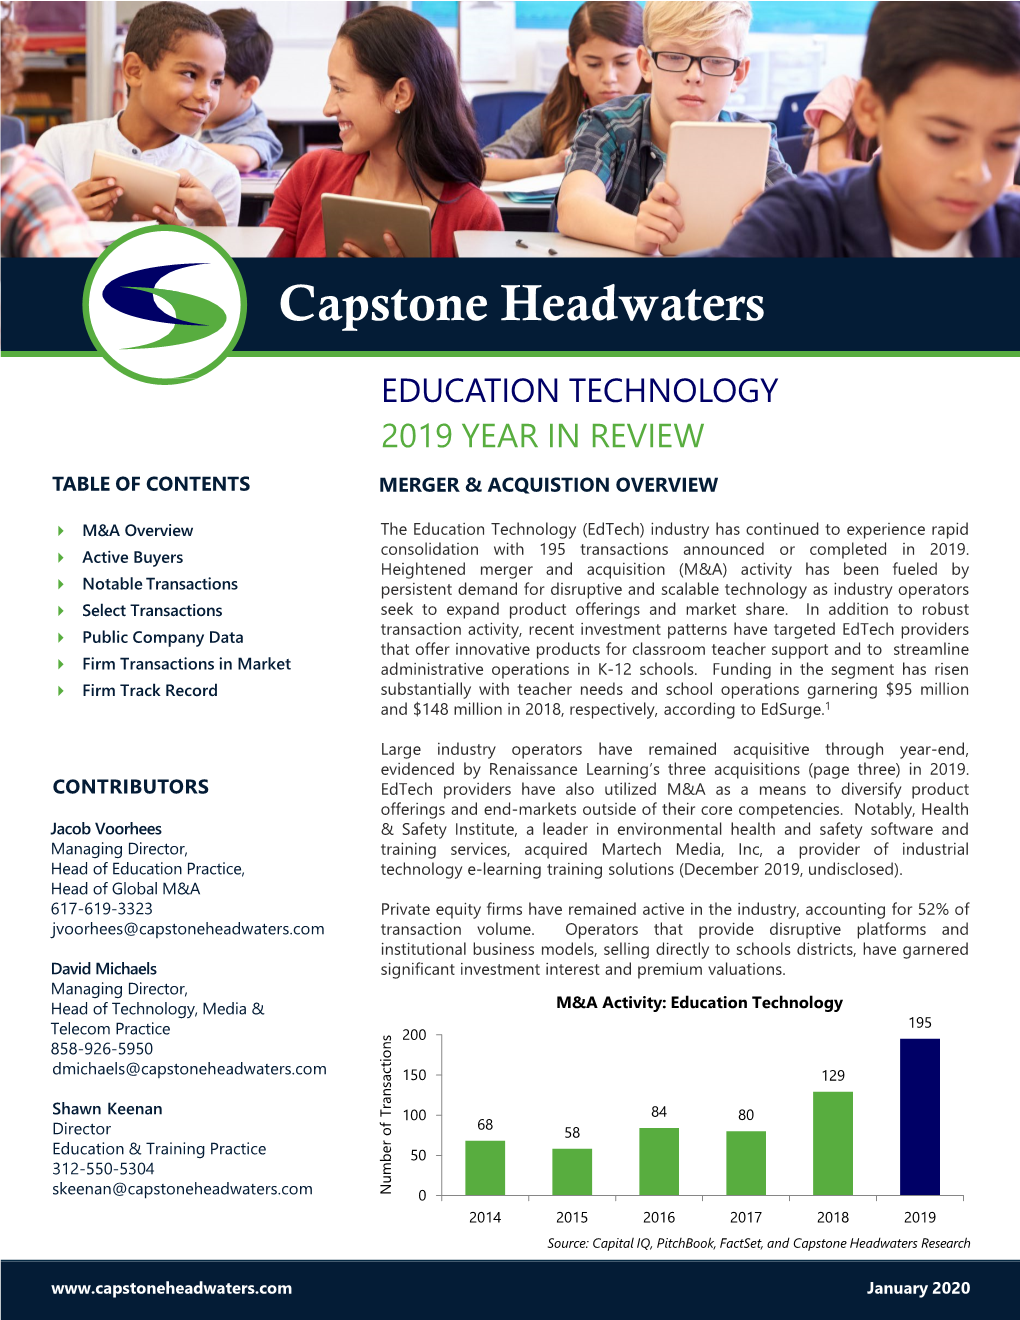 Capstone Headwaters Education Technology M&A Coverage Report